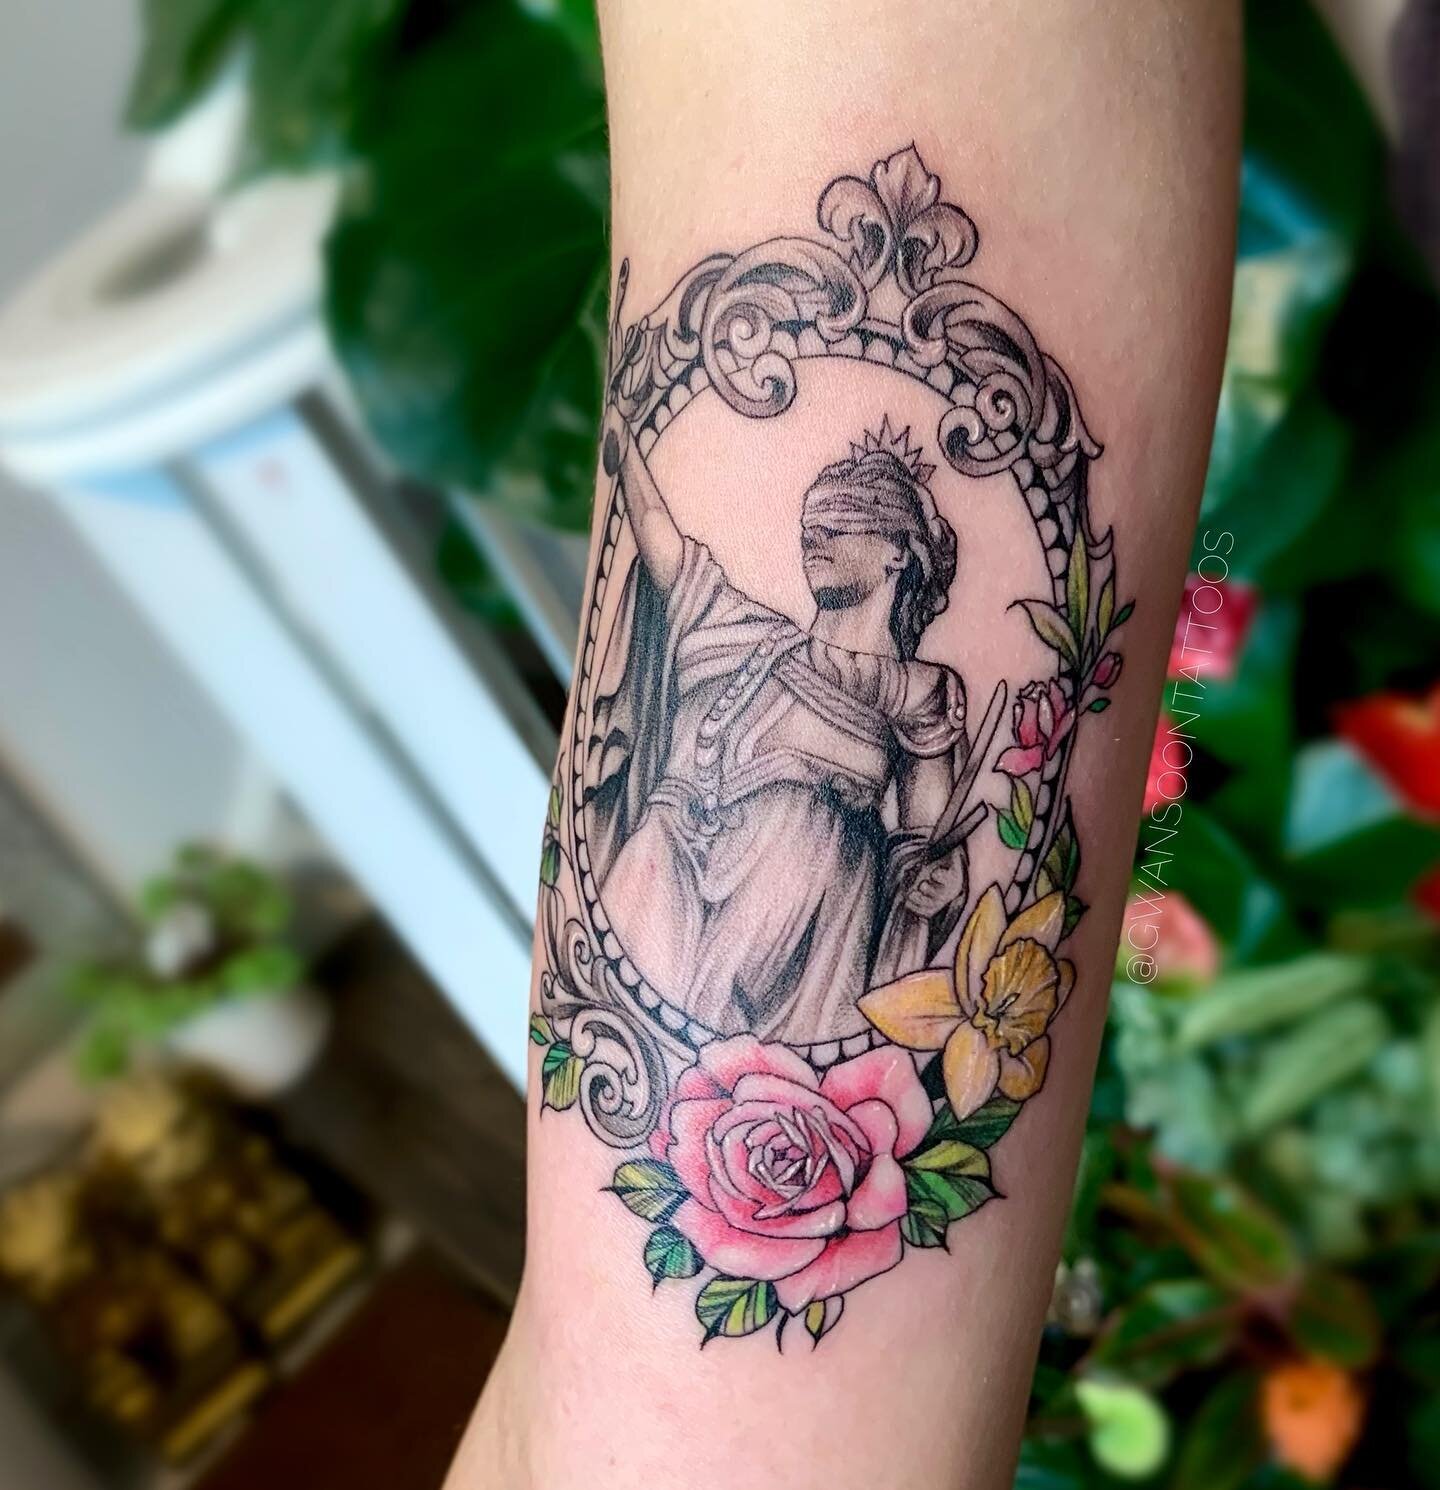 Lady justice with rose and narcissus flowers 🌸 ⚖️ done on inner arm. _________________________________________________ 

Follow us @gwansoontattoos ✍🏼

Artist - @jina.gwansoontattoos
_________________________________________________

☎️ 1-416-909-9